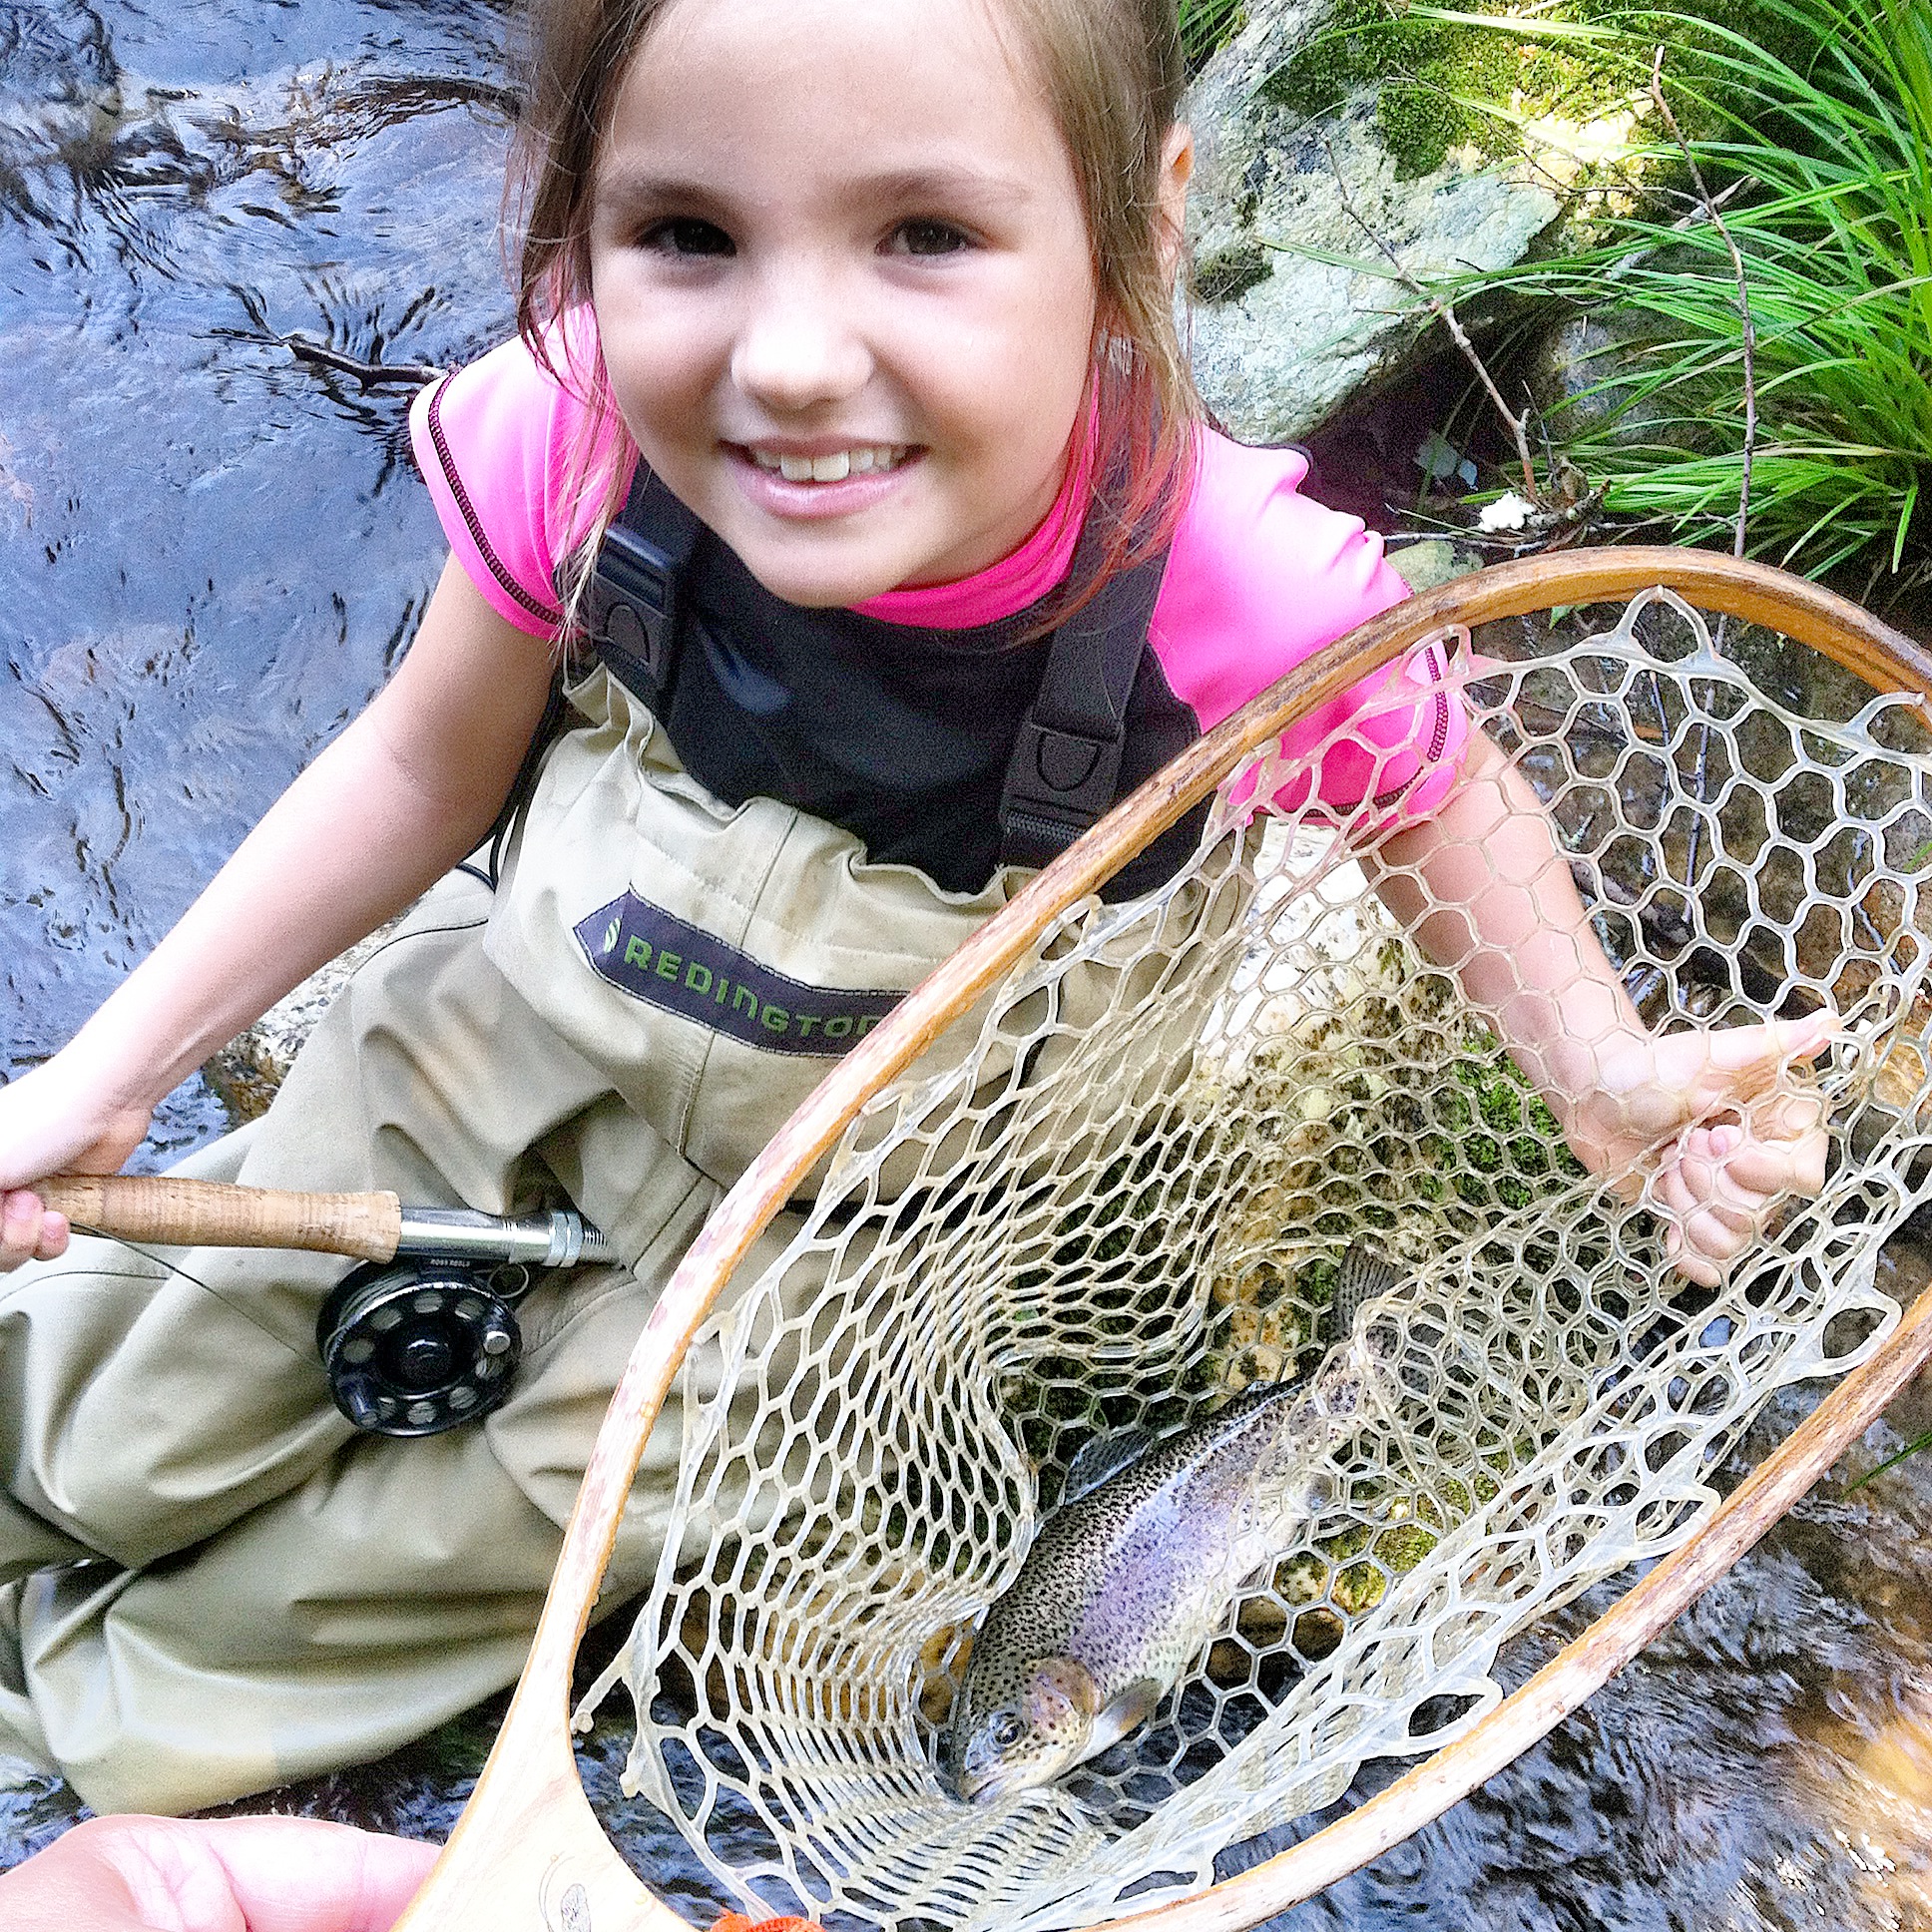 Fly Fishing trips for kids in the Smokies